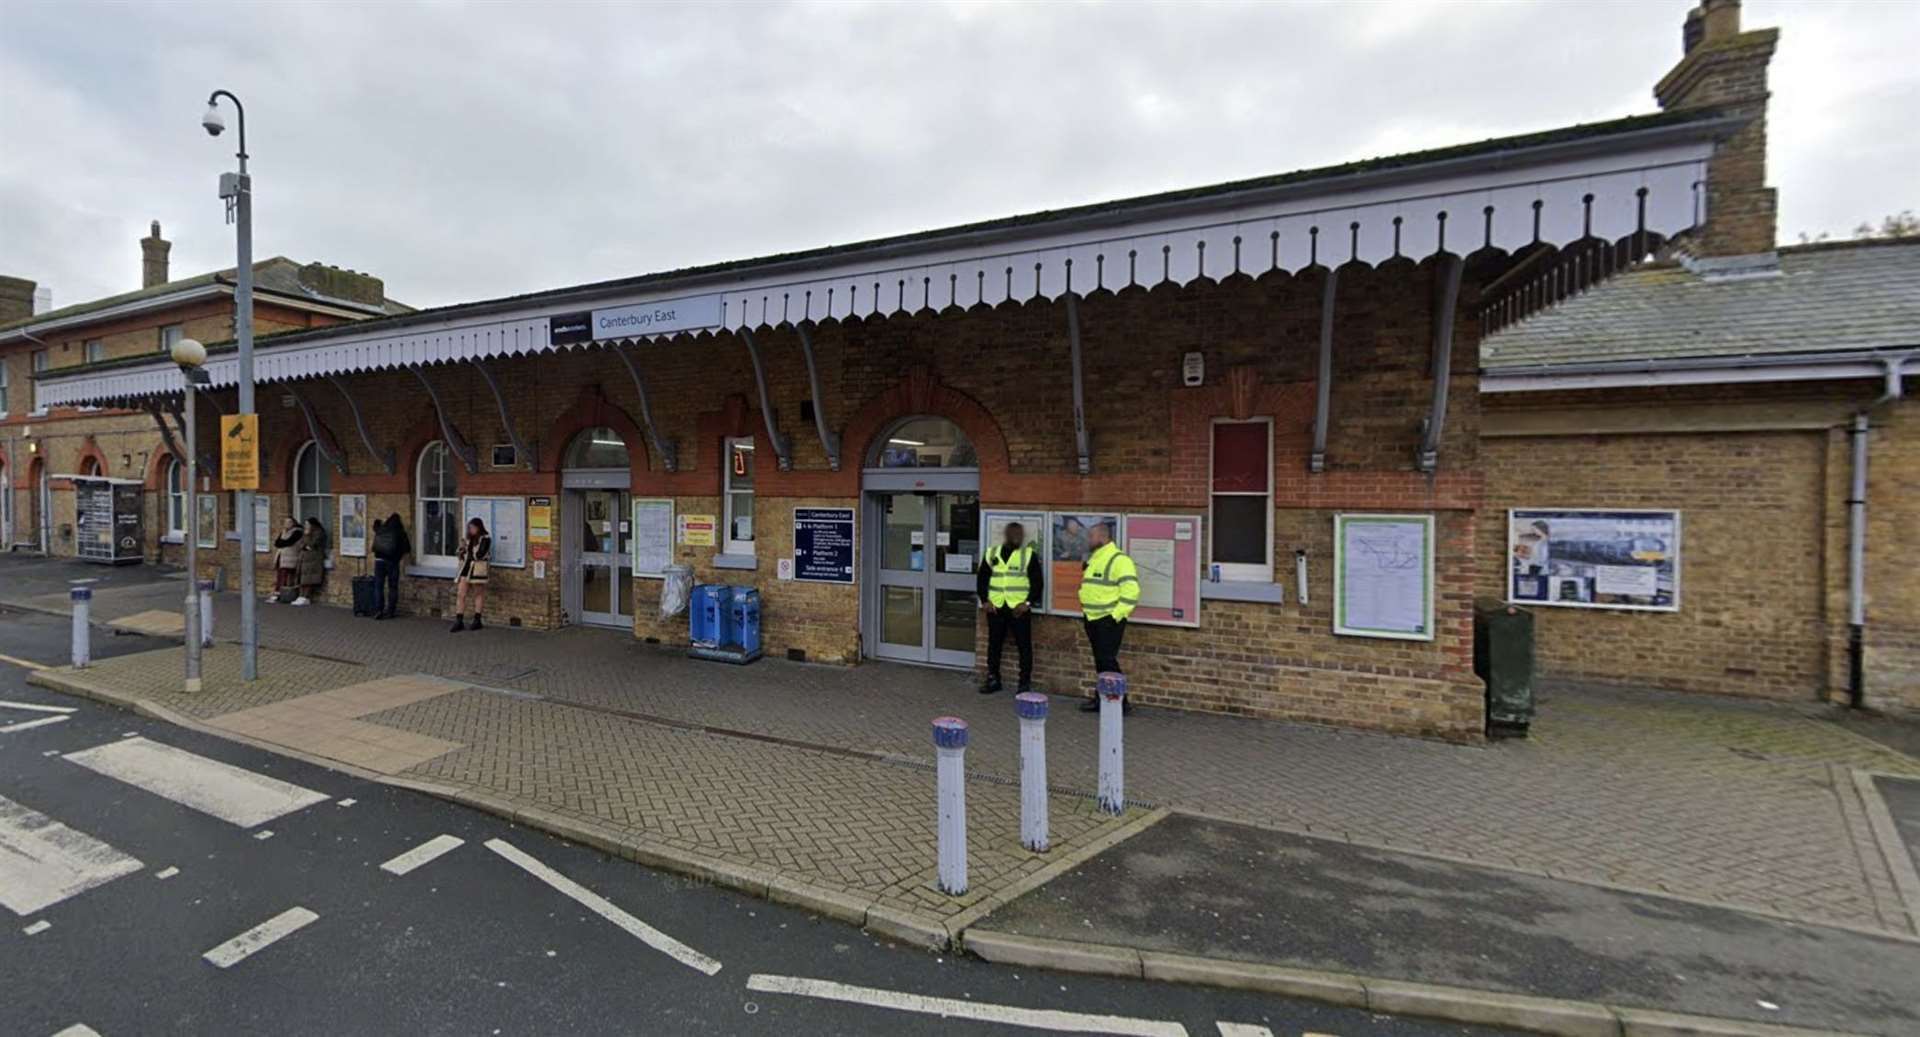 The incident occurred at Canterbury East Station